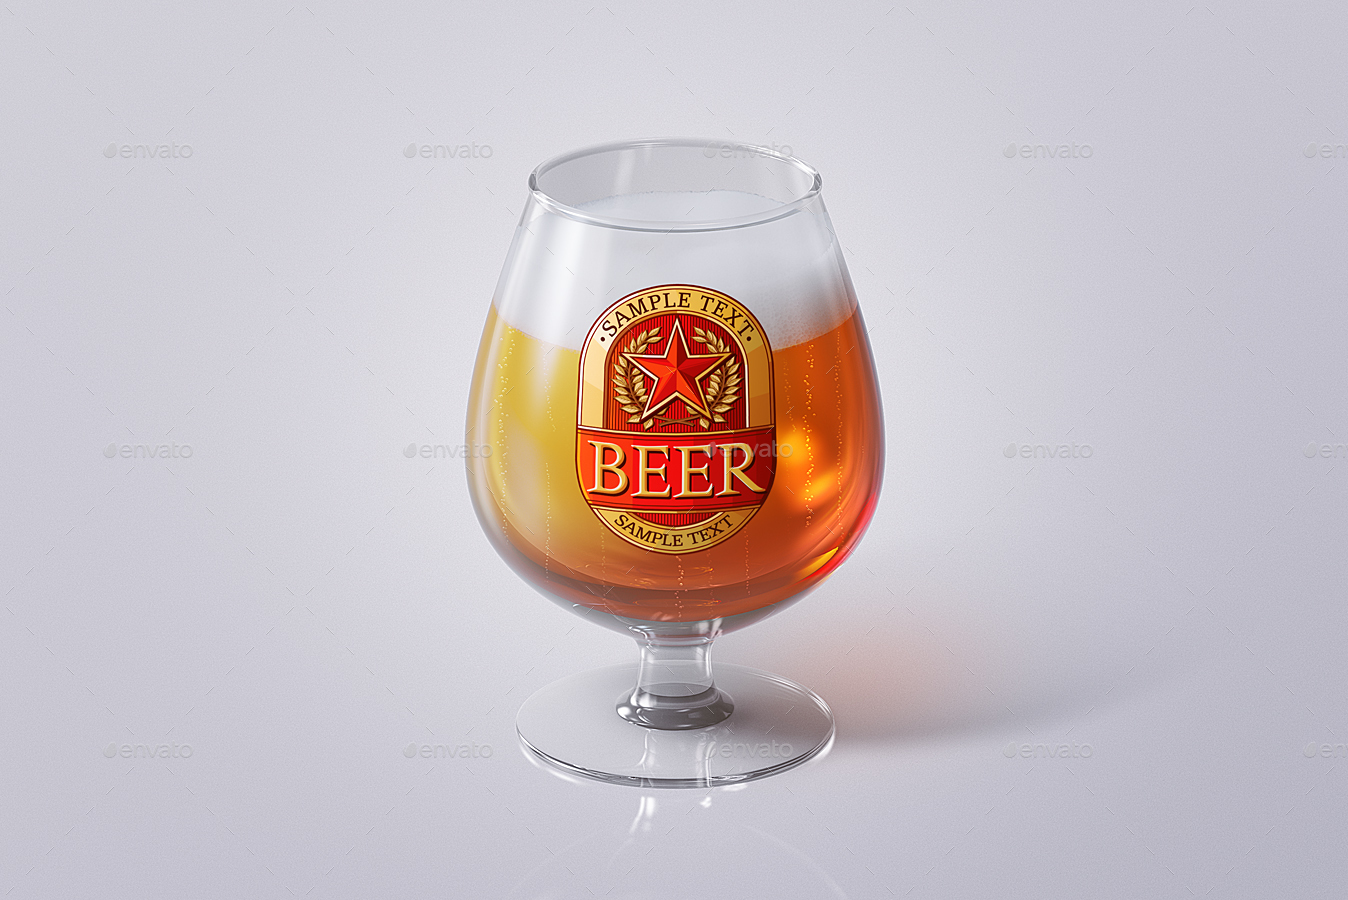 Download Mockup Beer Glass Free / Beer glass and bottle with label ...